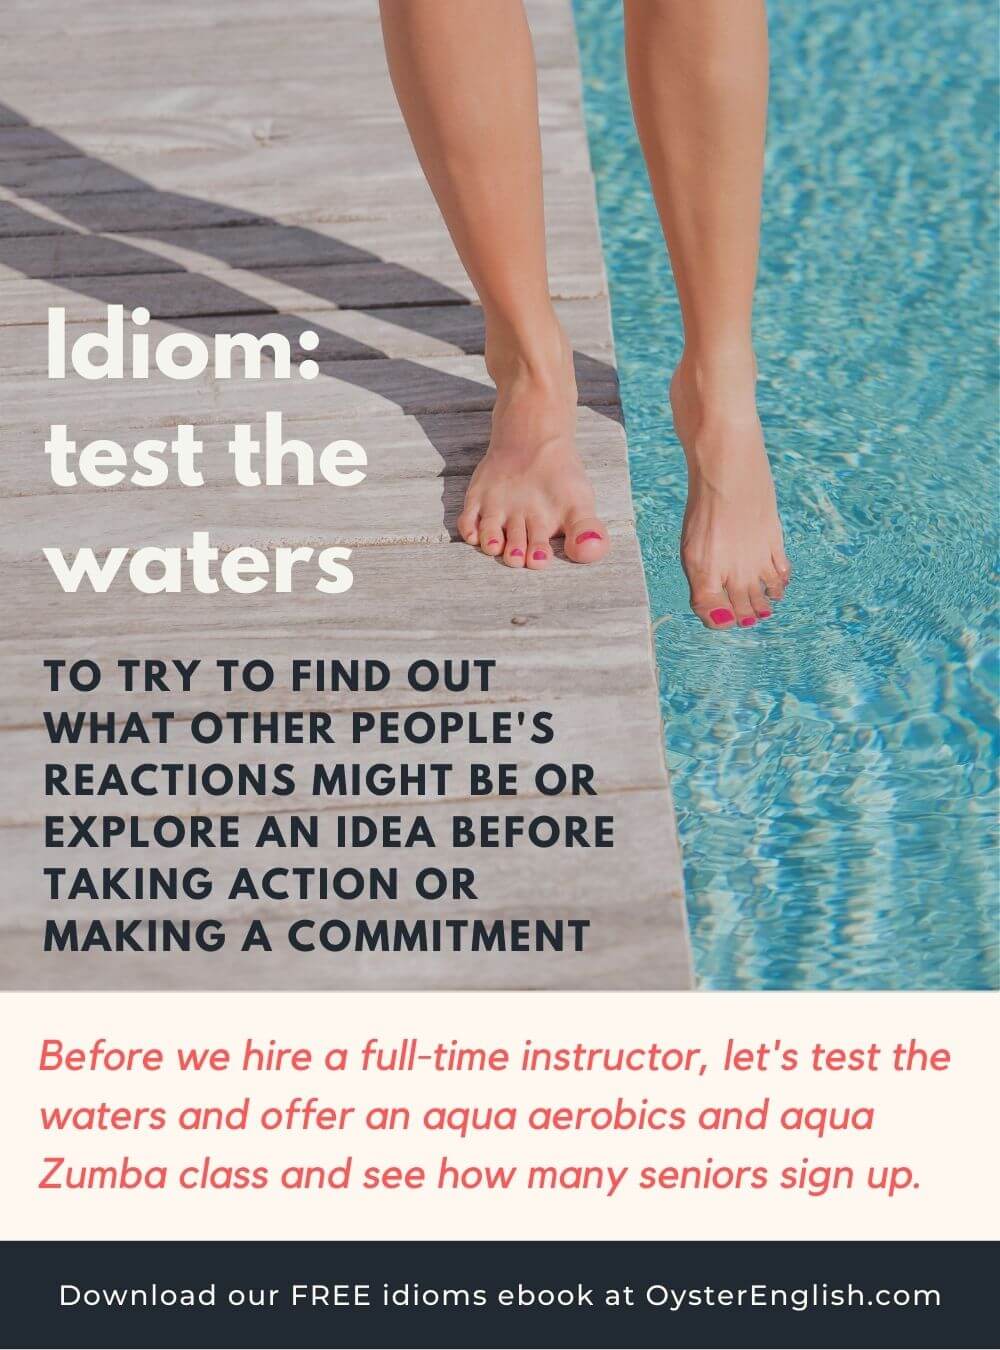 Image of woman dipping her toes into a pool: Before we hire an instructor, let's test the waters and offer an aqua aerobics and aqua Zumba class and see how many seniors sign up.